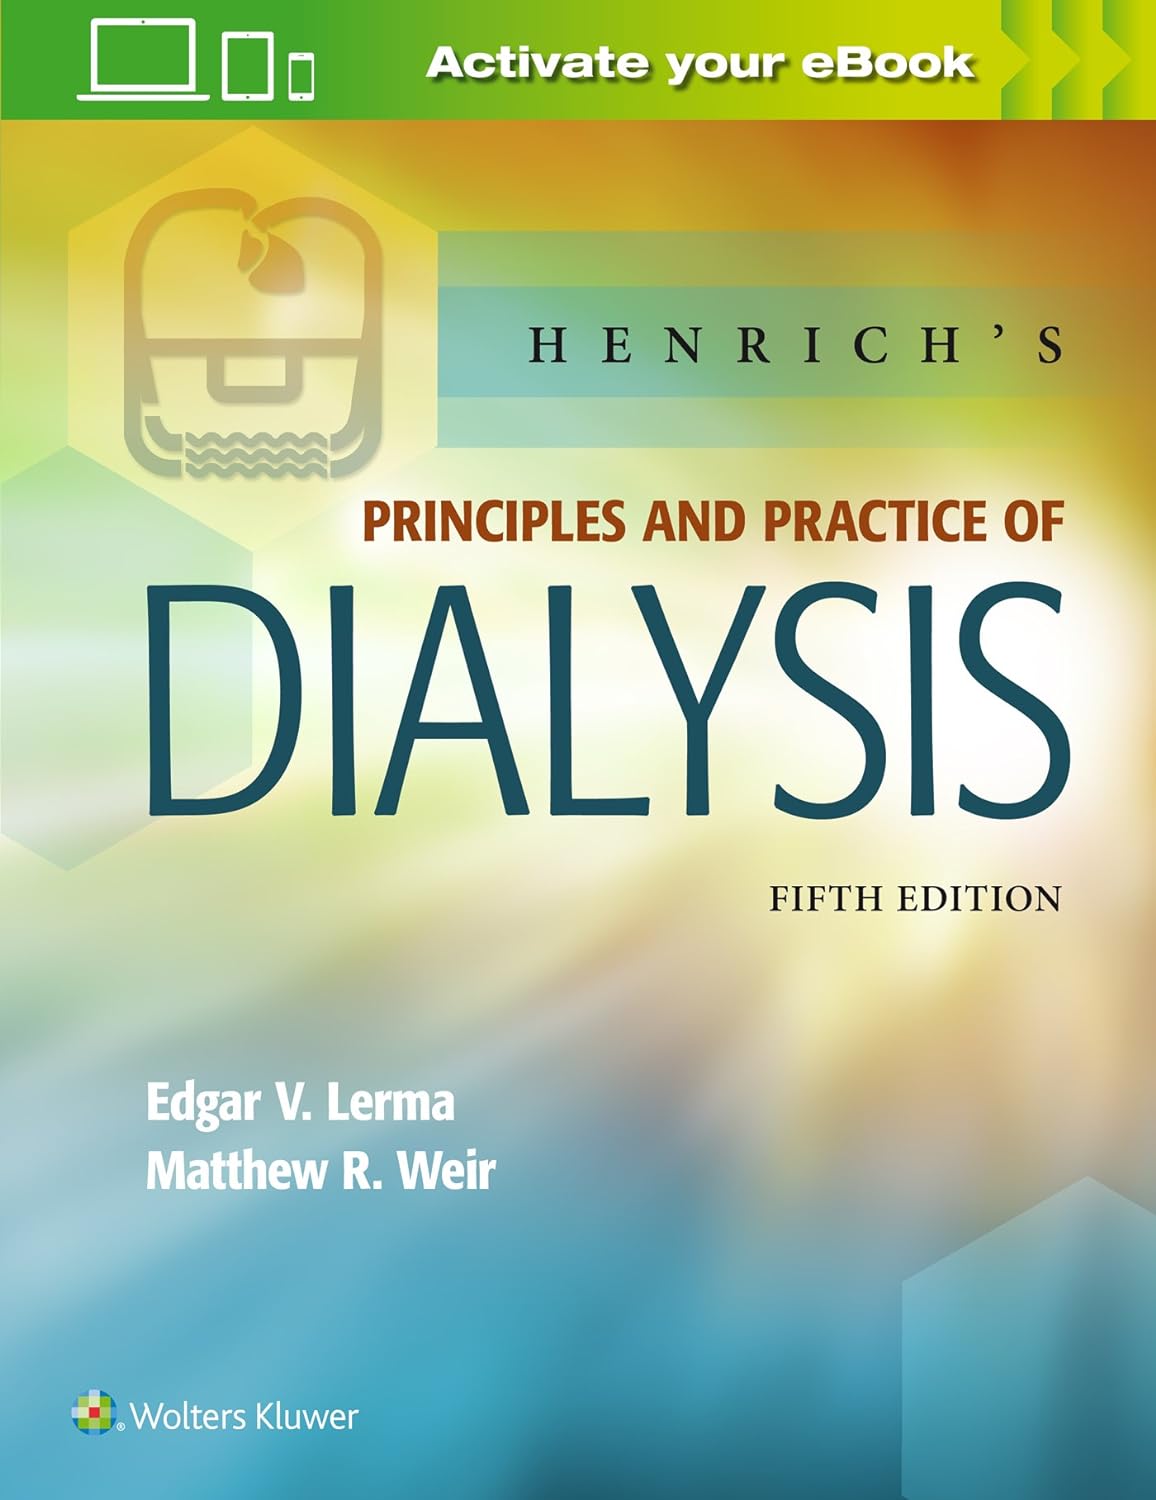 Henrich s Principles and Practice of Dialysis, 5th edition by  Edgar Lerma MD